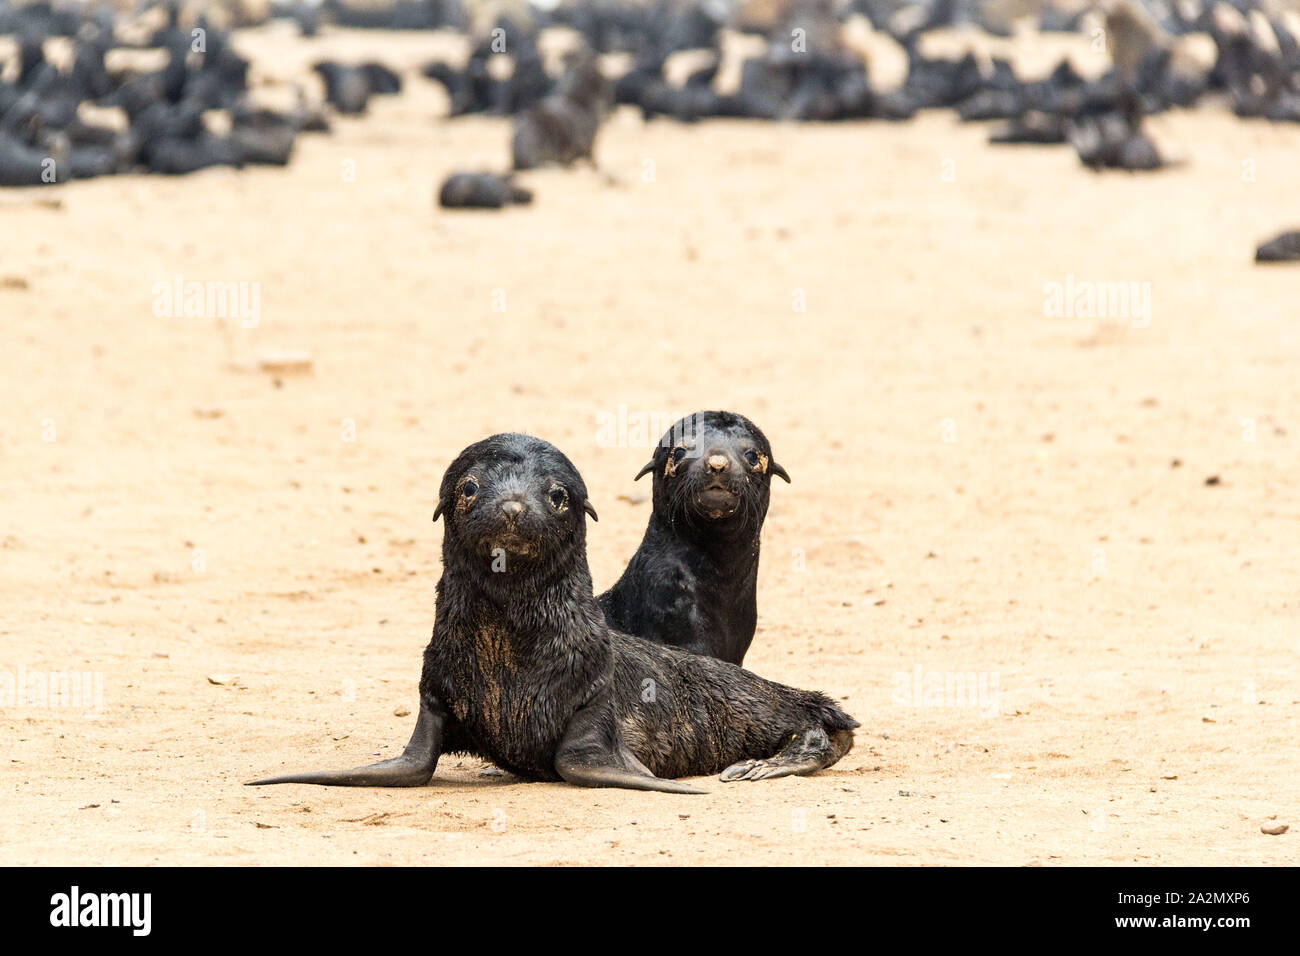 South African Fur Seal babies nearby their colony, Cape Cross Seal Reserve, Namibia, Africa Stock Photo